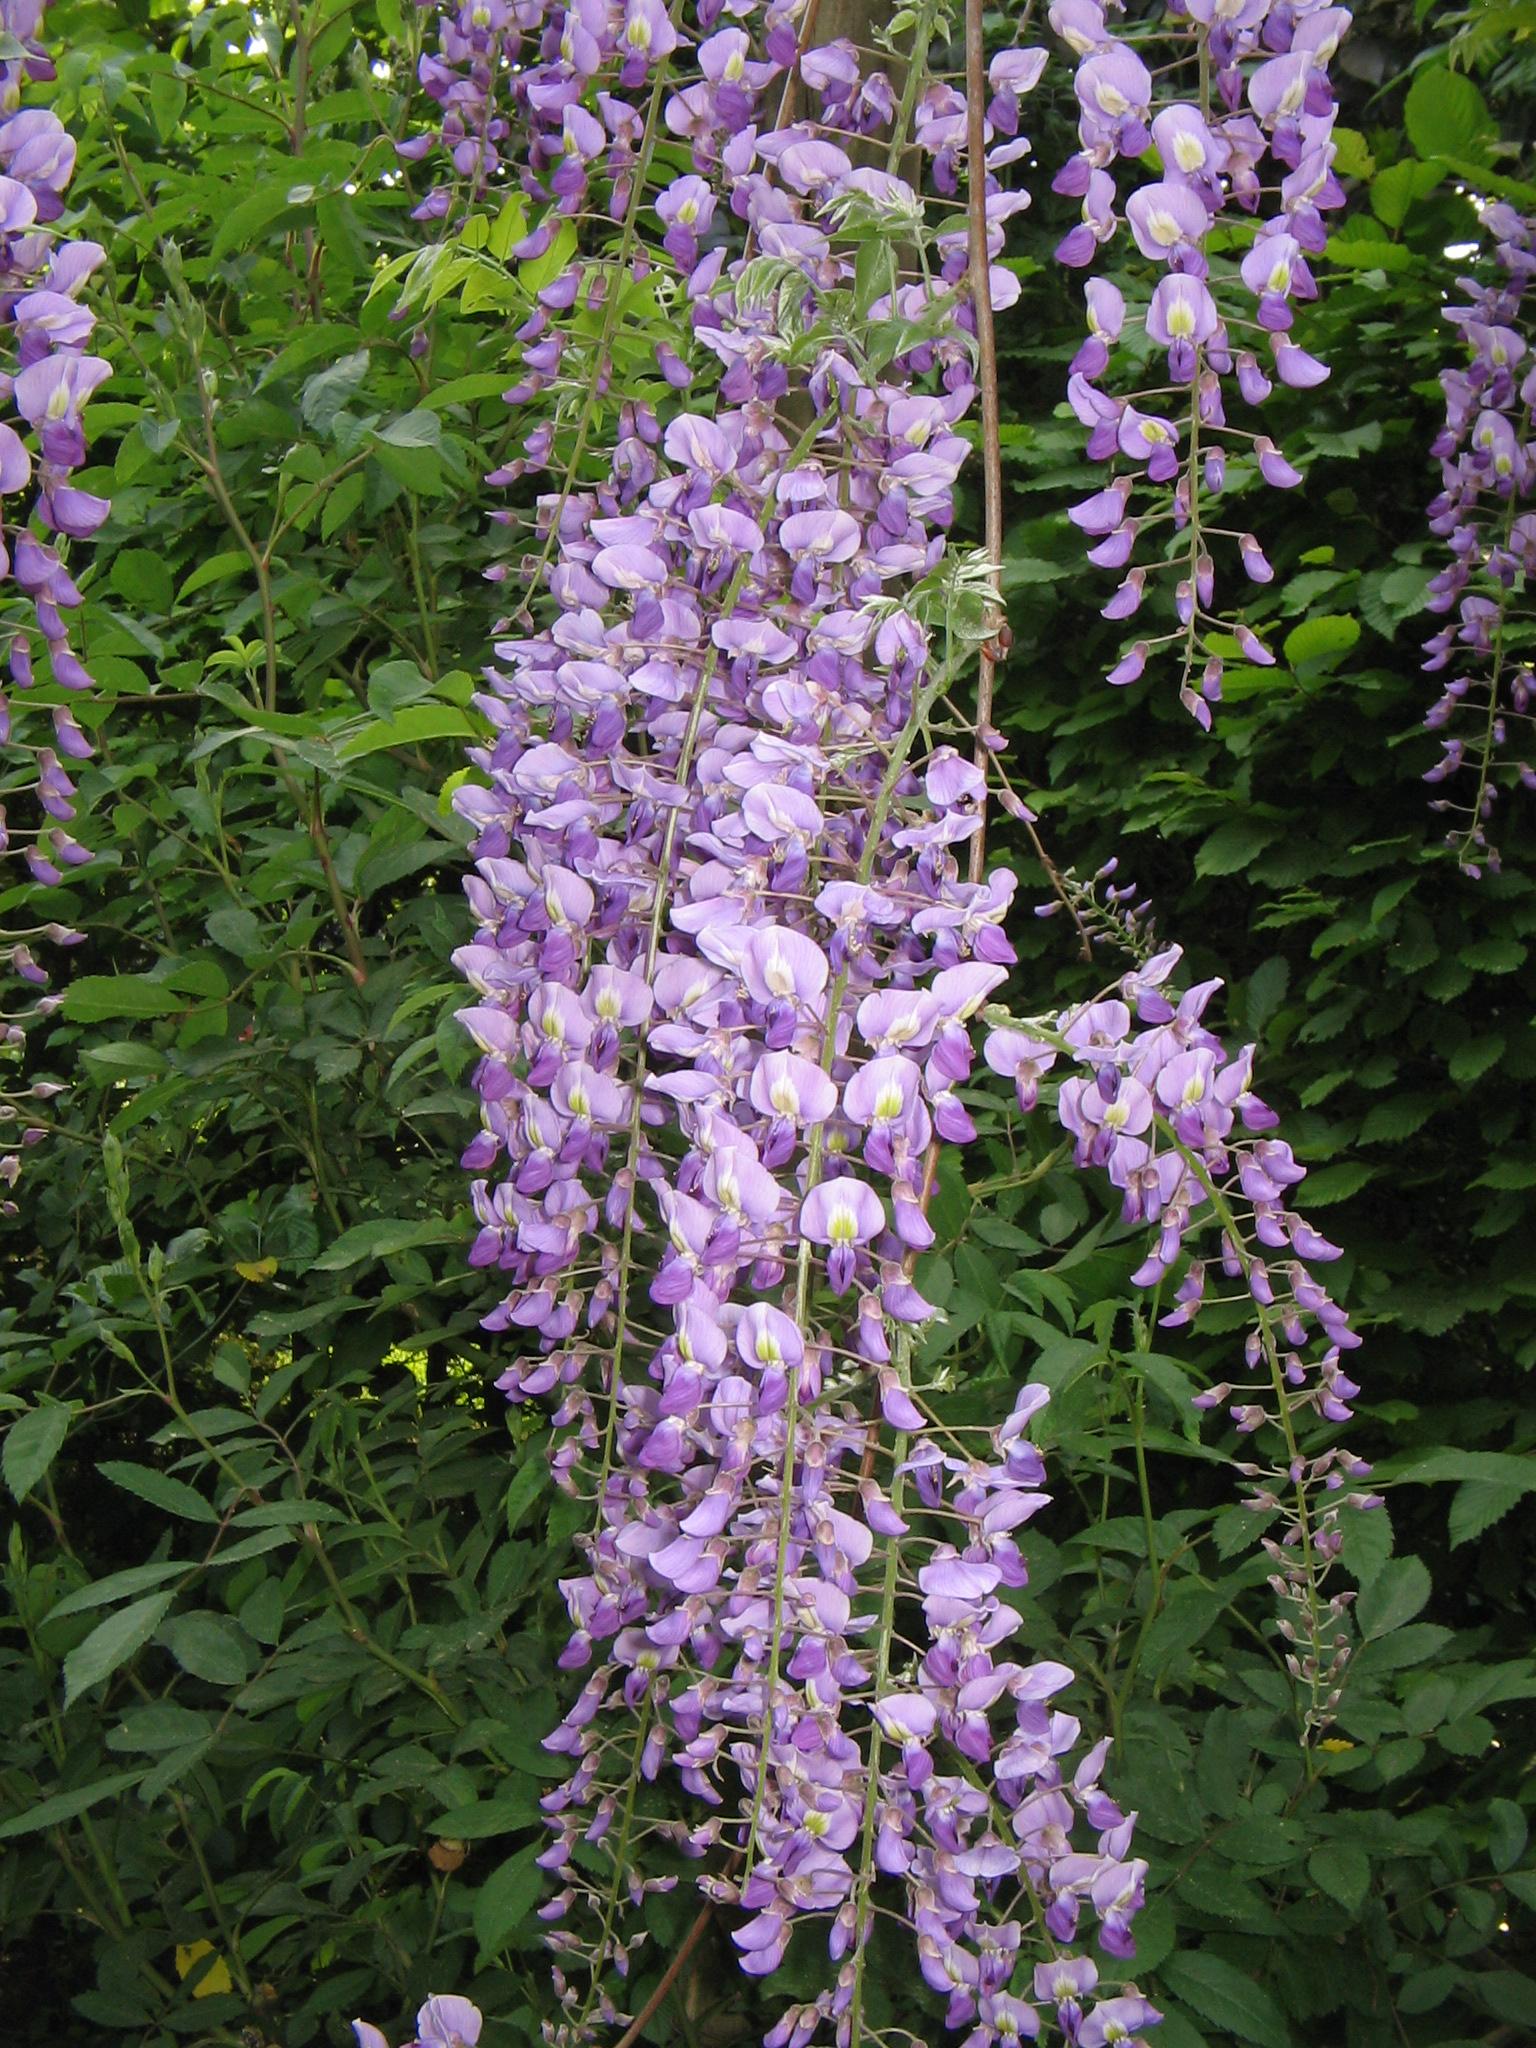 light-purple flowers with yellow-white center, green leaves and stems